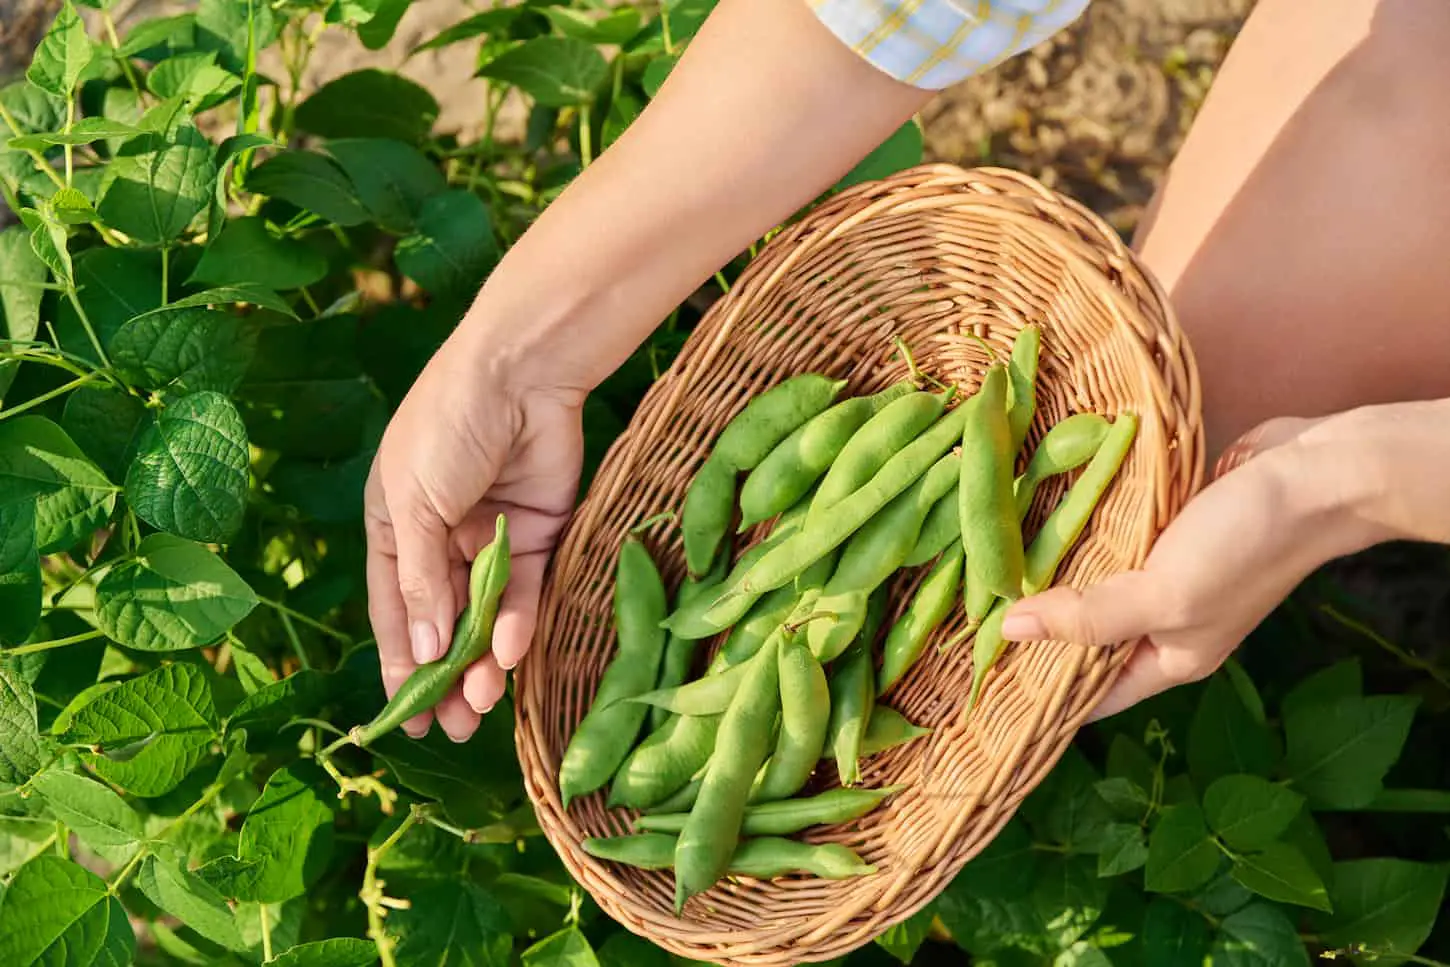 An image of a Woman picking green beans in the summer garden.